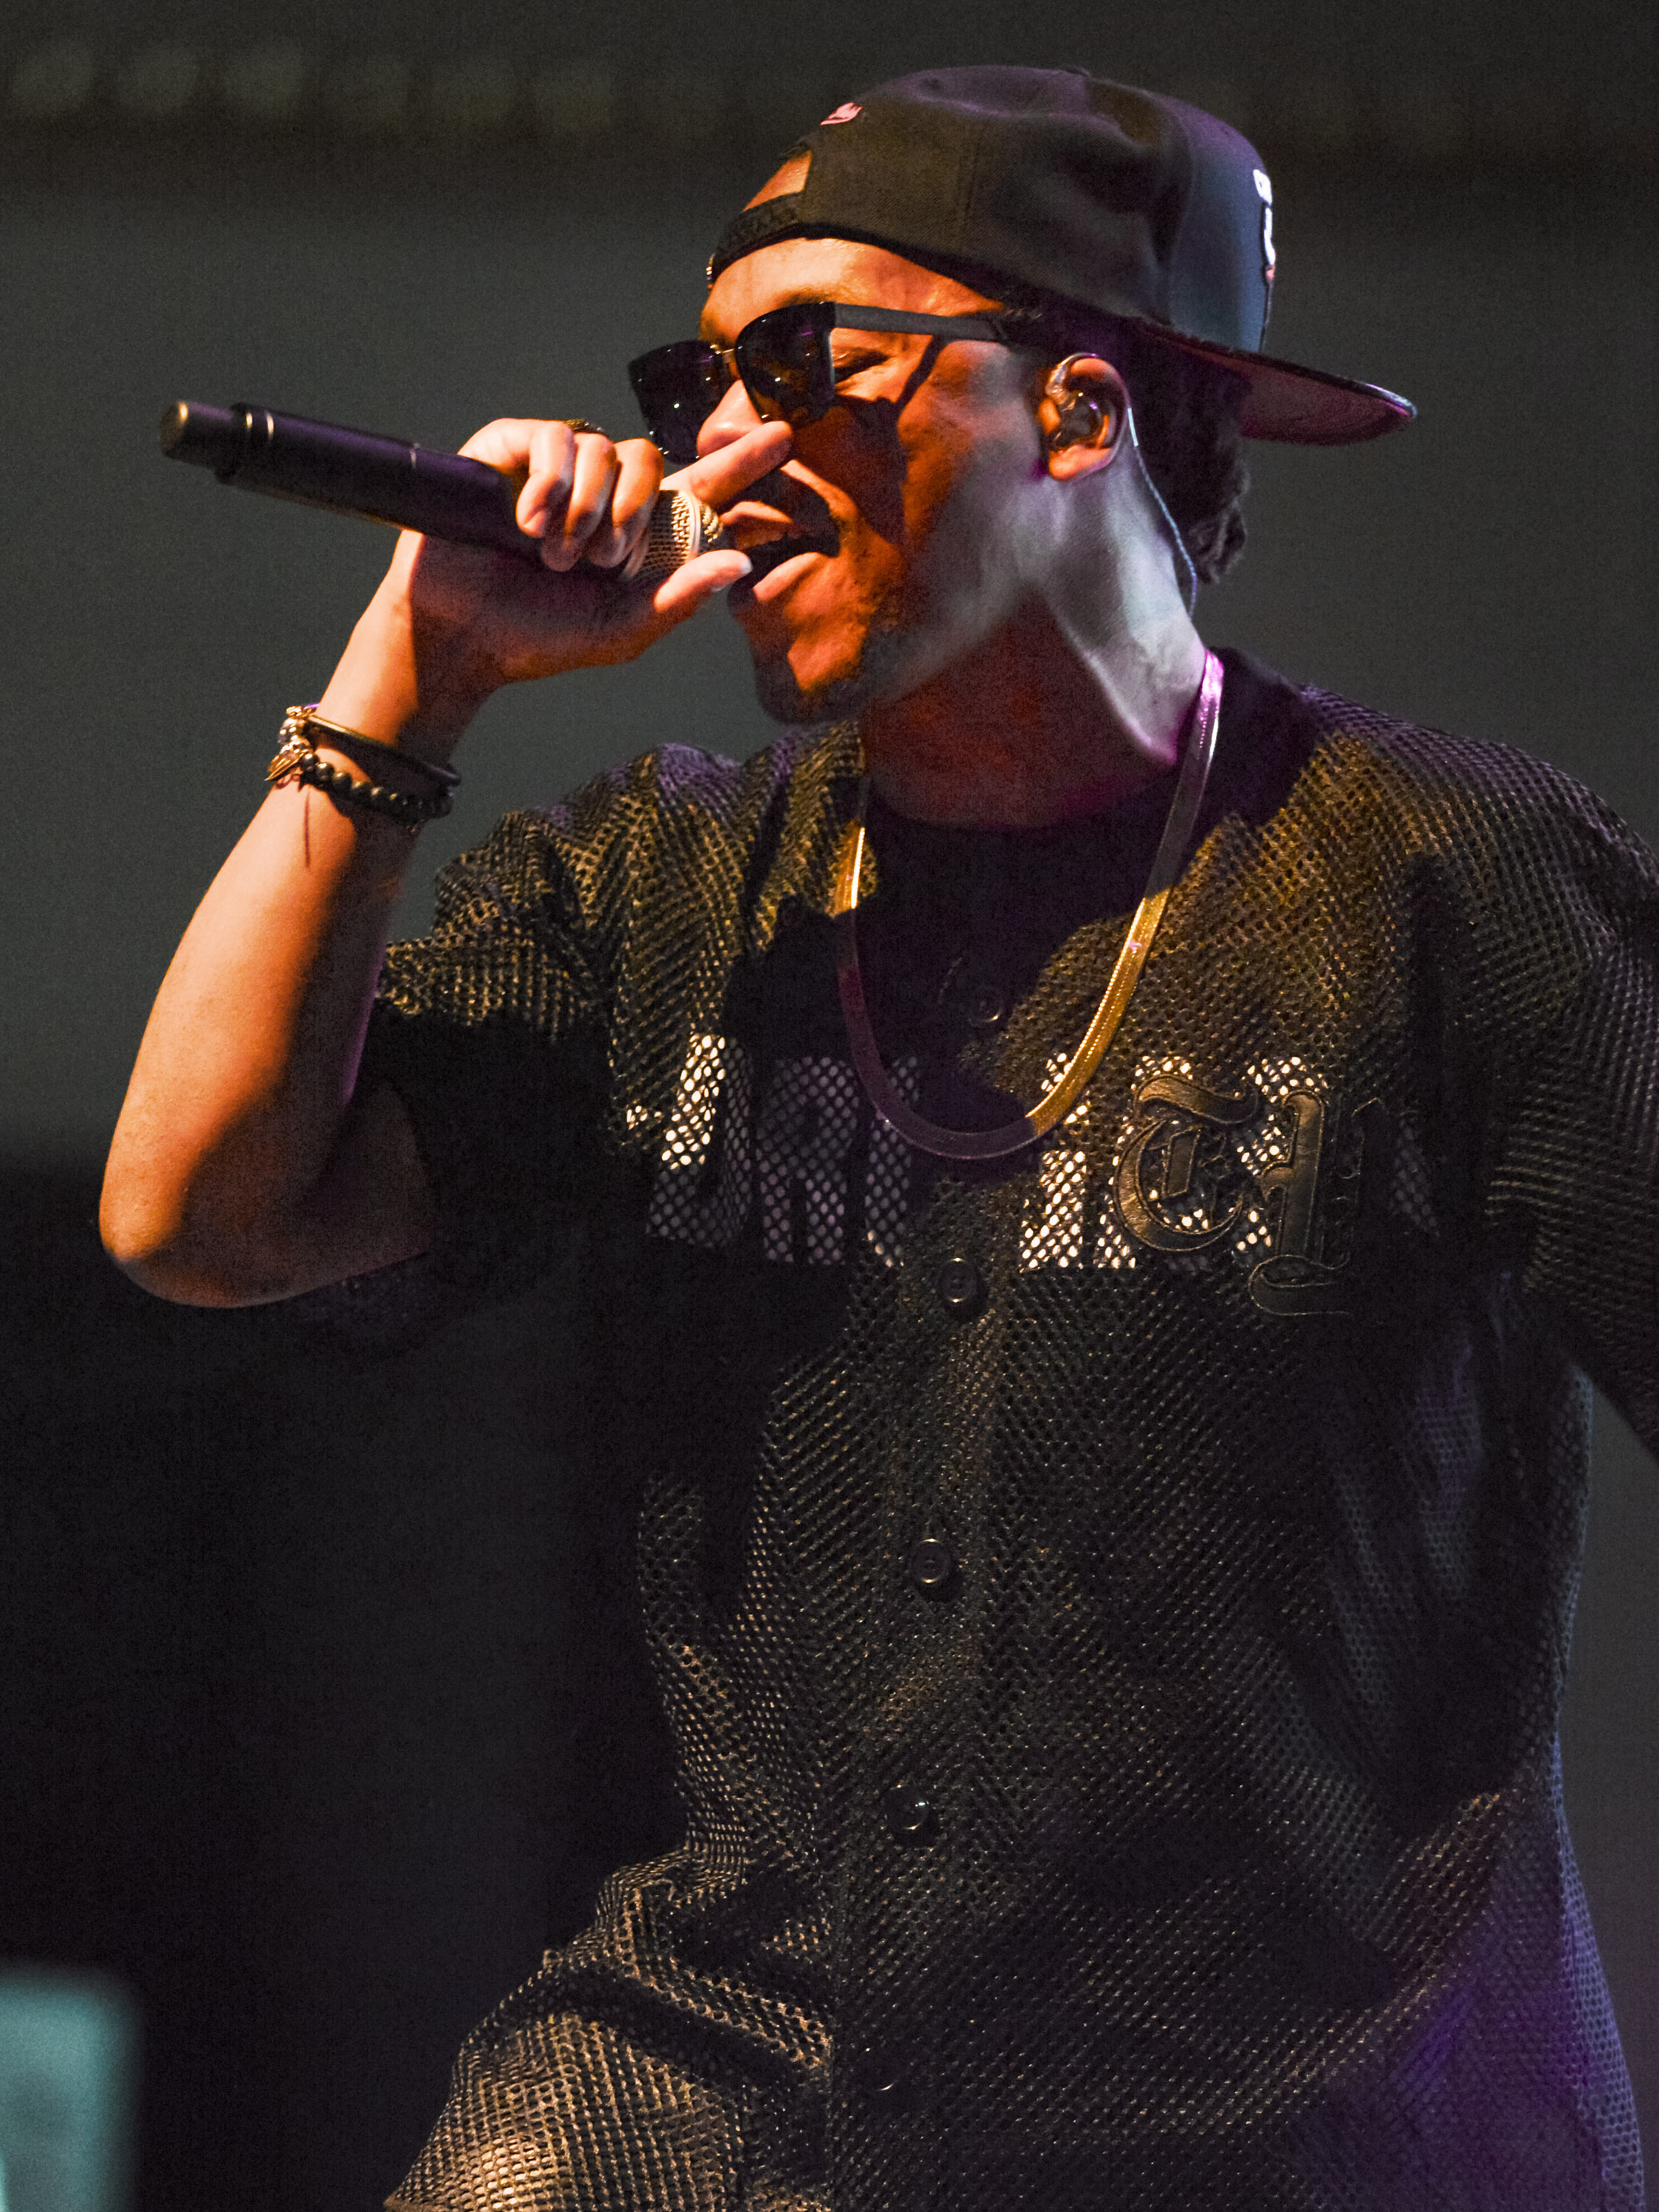 Artist Lupe Fiasco performing during his &quot;Tetsuo and Youth Preview&quot; tour in Nashville